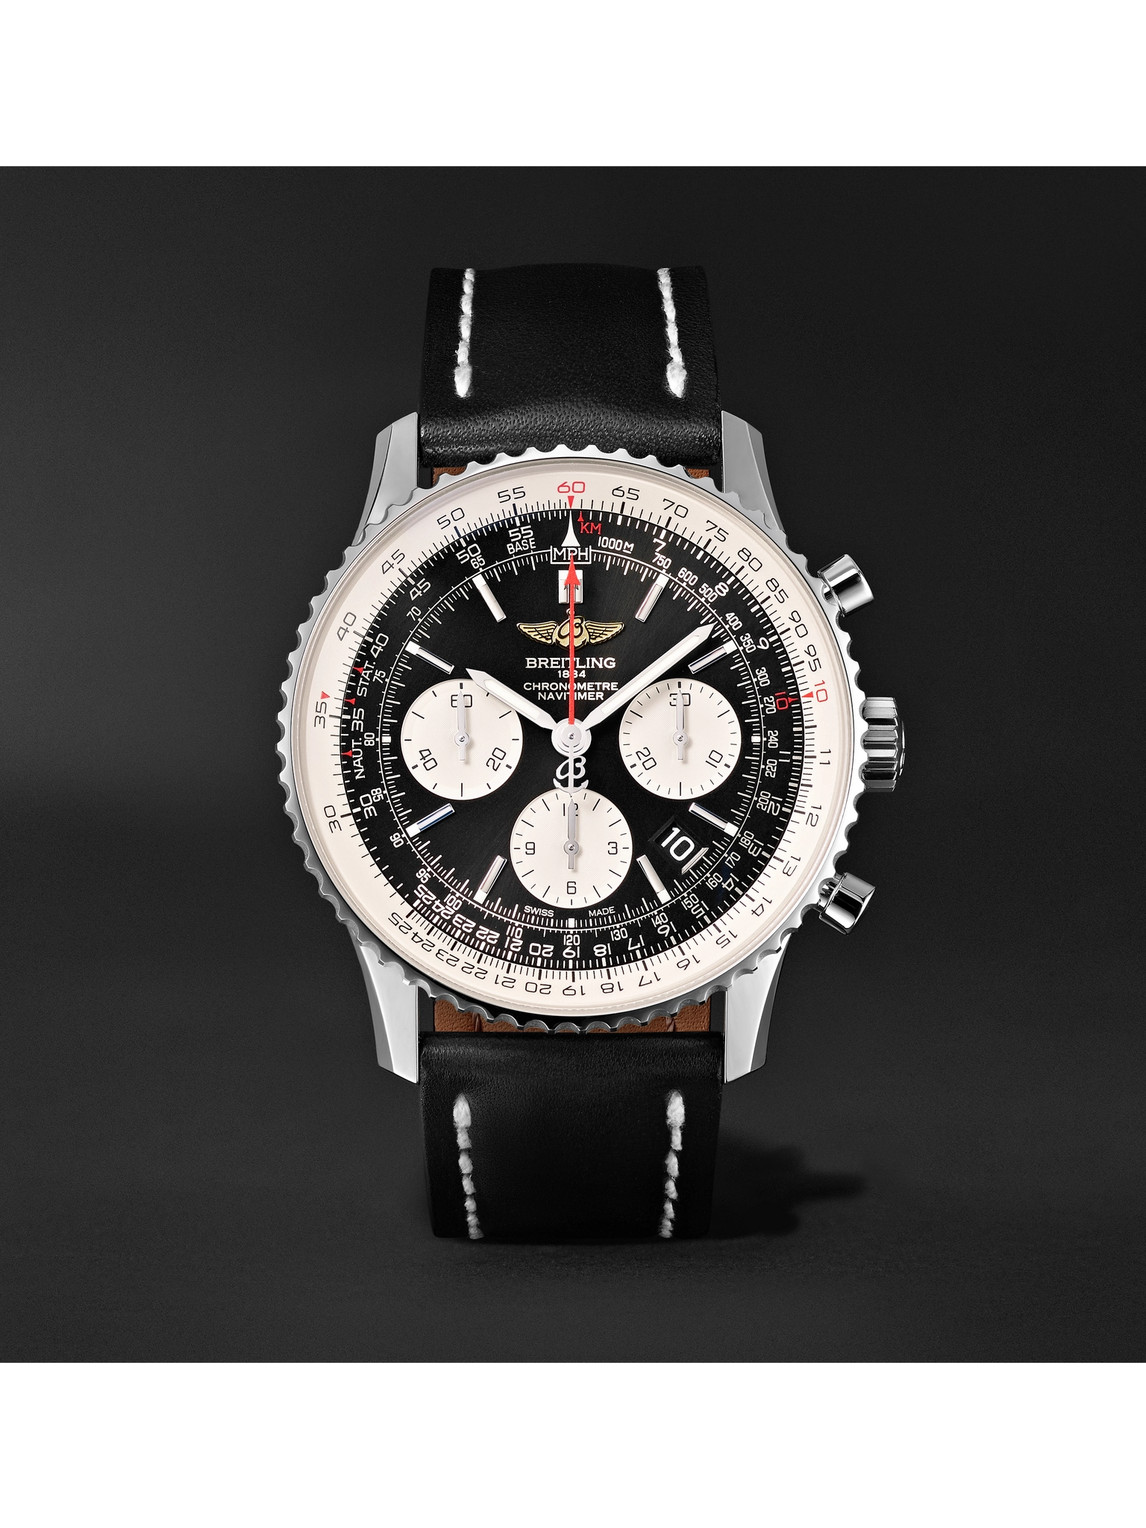 Breitling Navitimer 01 Chronograph 43mm Stainless Steel And Leather Watch, Ref. No. Ab012012/bb01 In Black